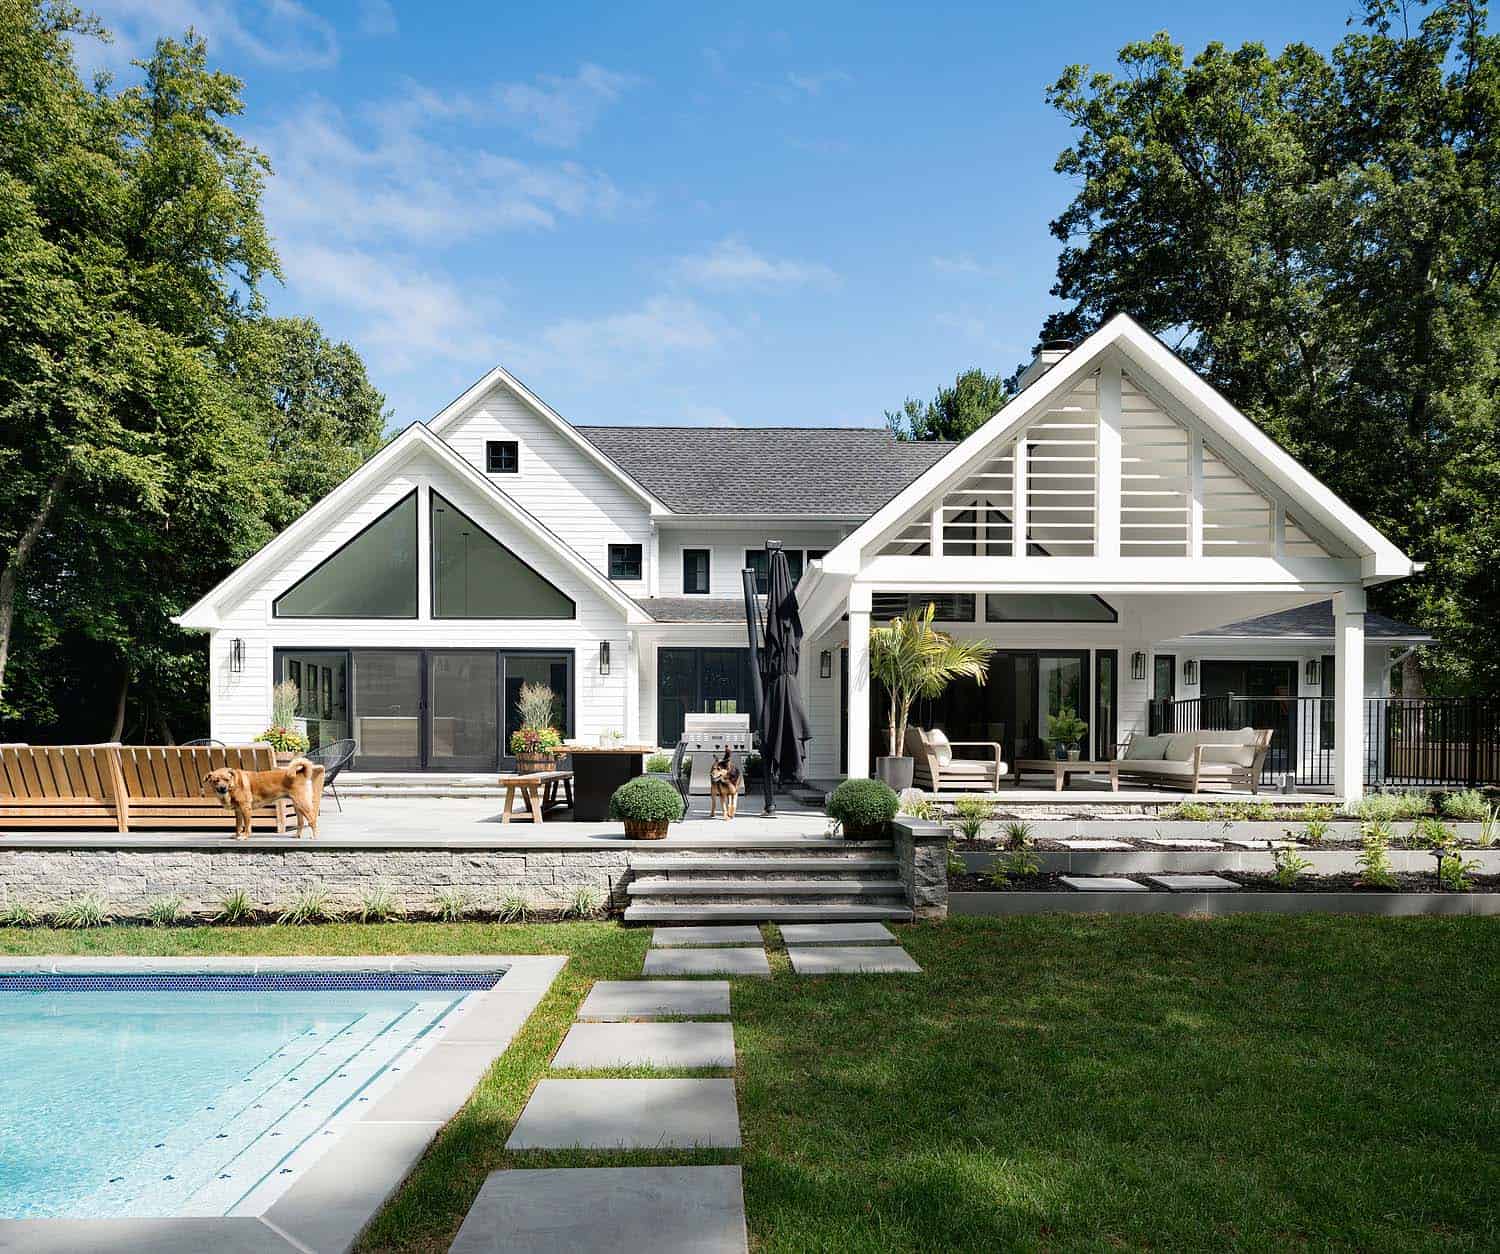 Bright and airy contemporary farmhouse style surrounded by ...